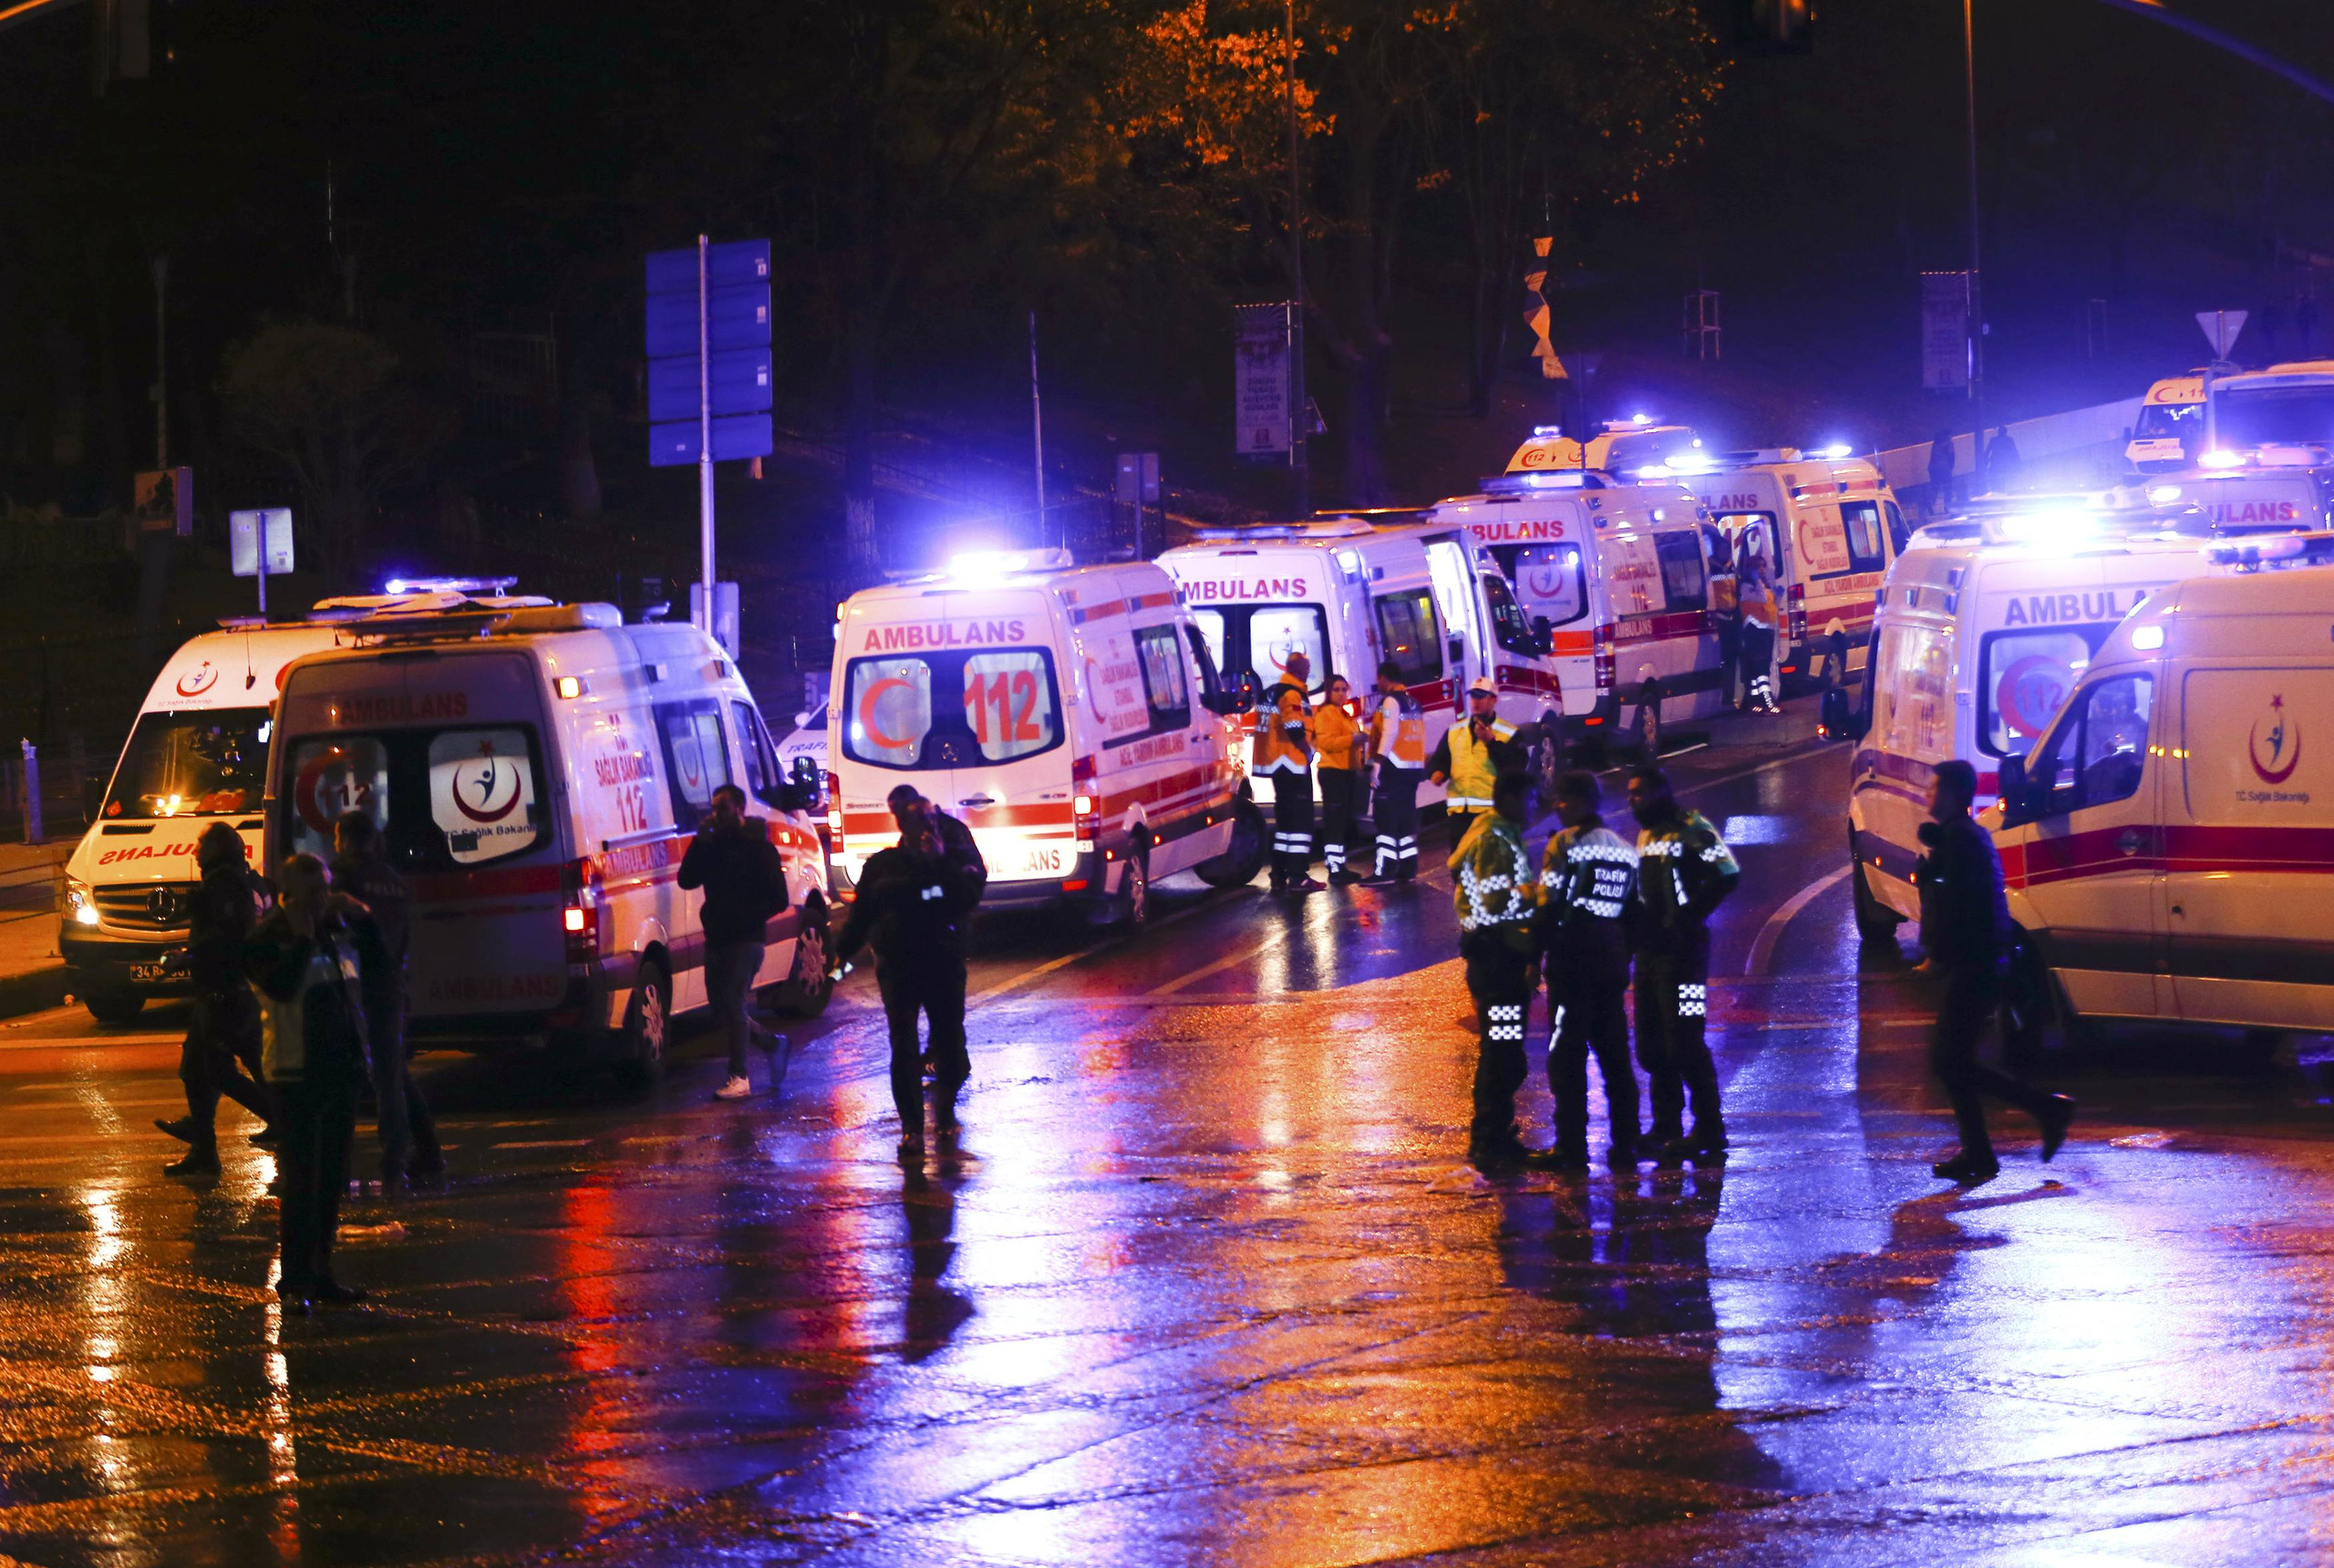 Police and ambulances arrive at the site of an explosion in central Istanbul, Turkey, December 10, 2016. REUTERS/Murad Sezer